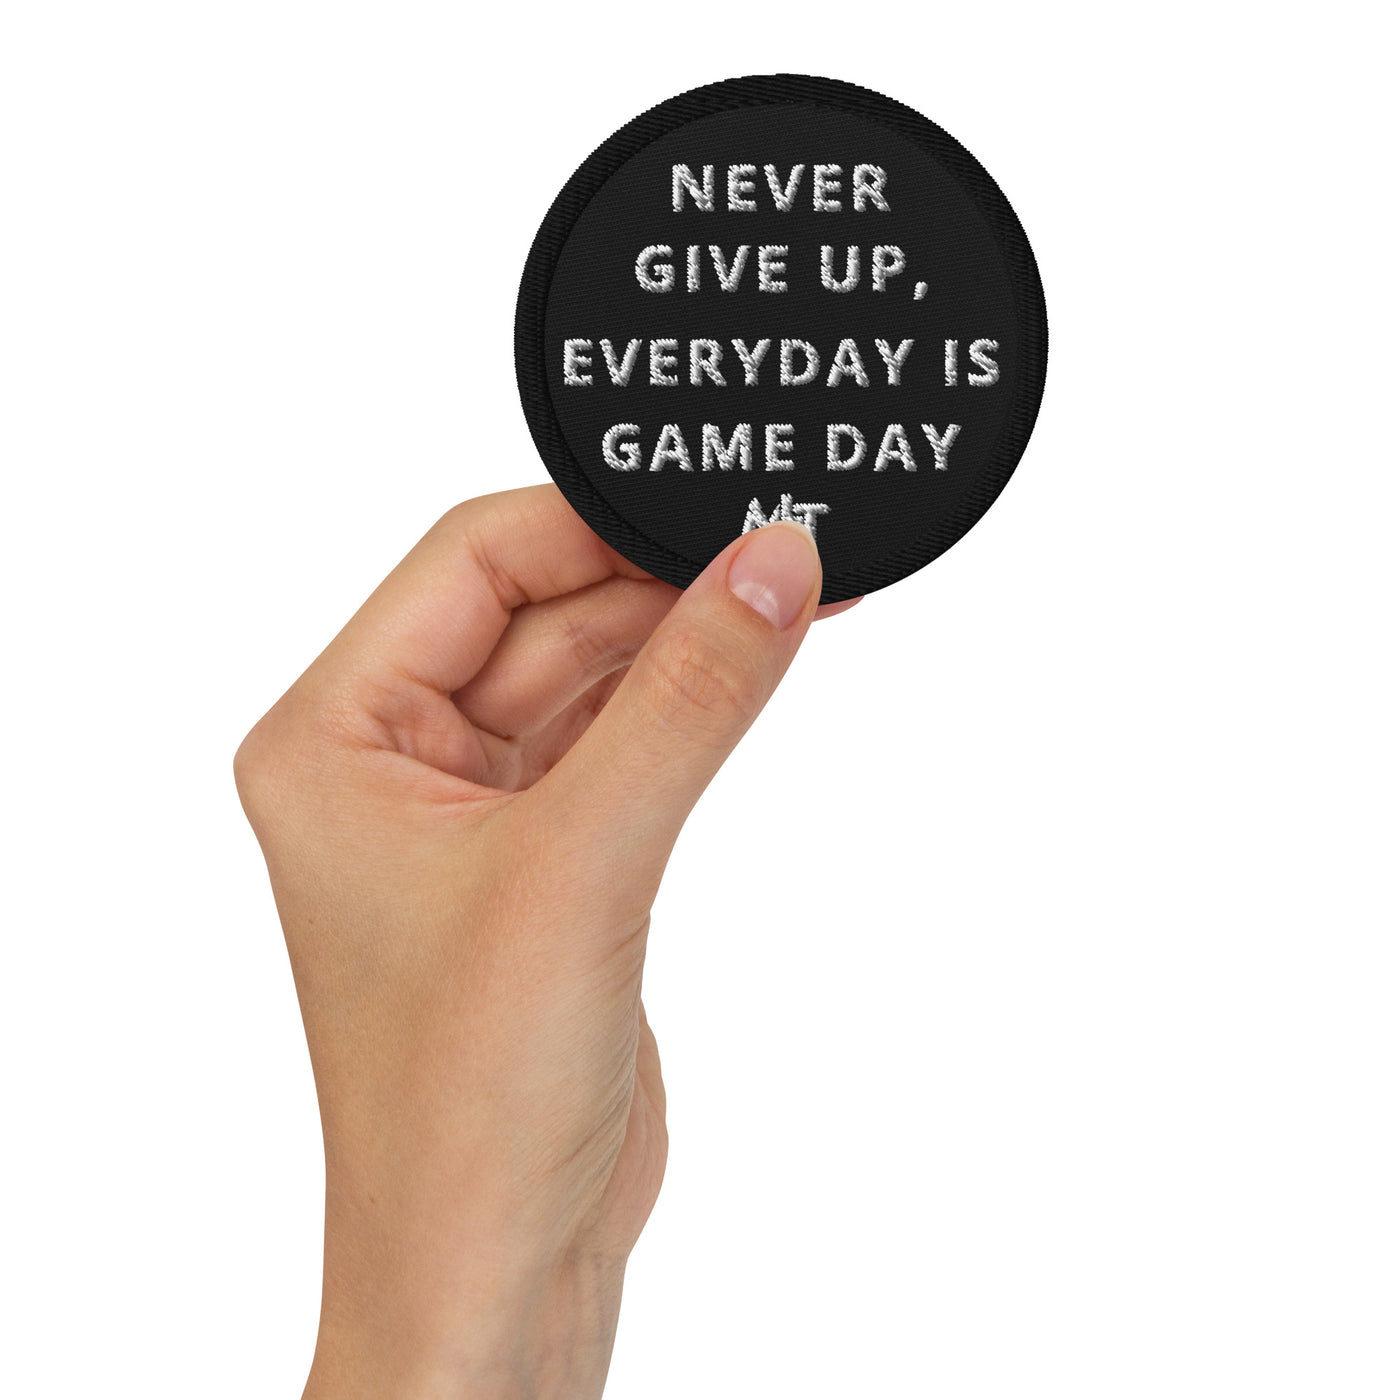 Never Give Up, everyday is Game Day - Embroidered patches